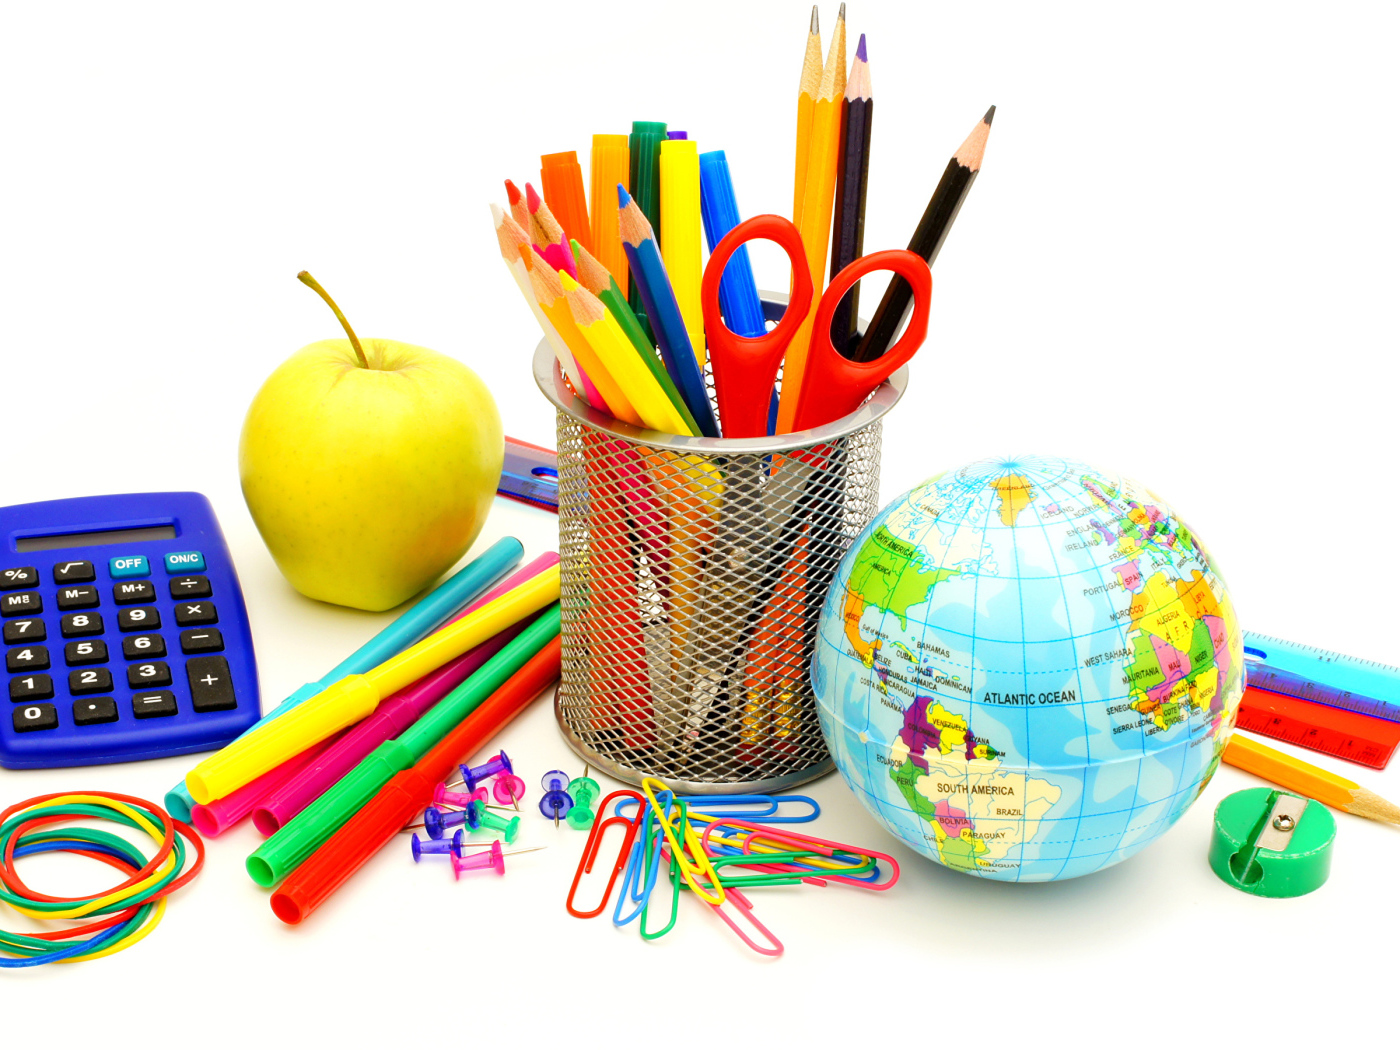 Stationery school supplies on a white background on Knowledge Day on September 1